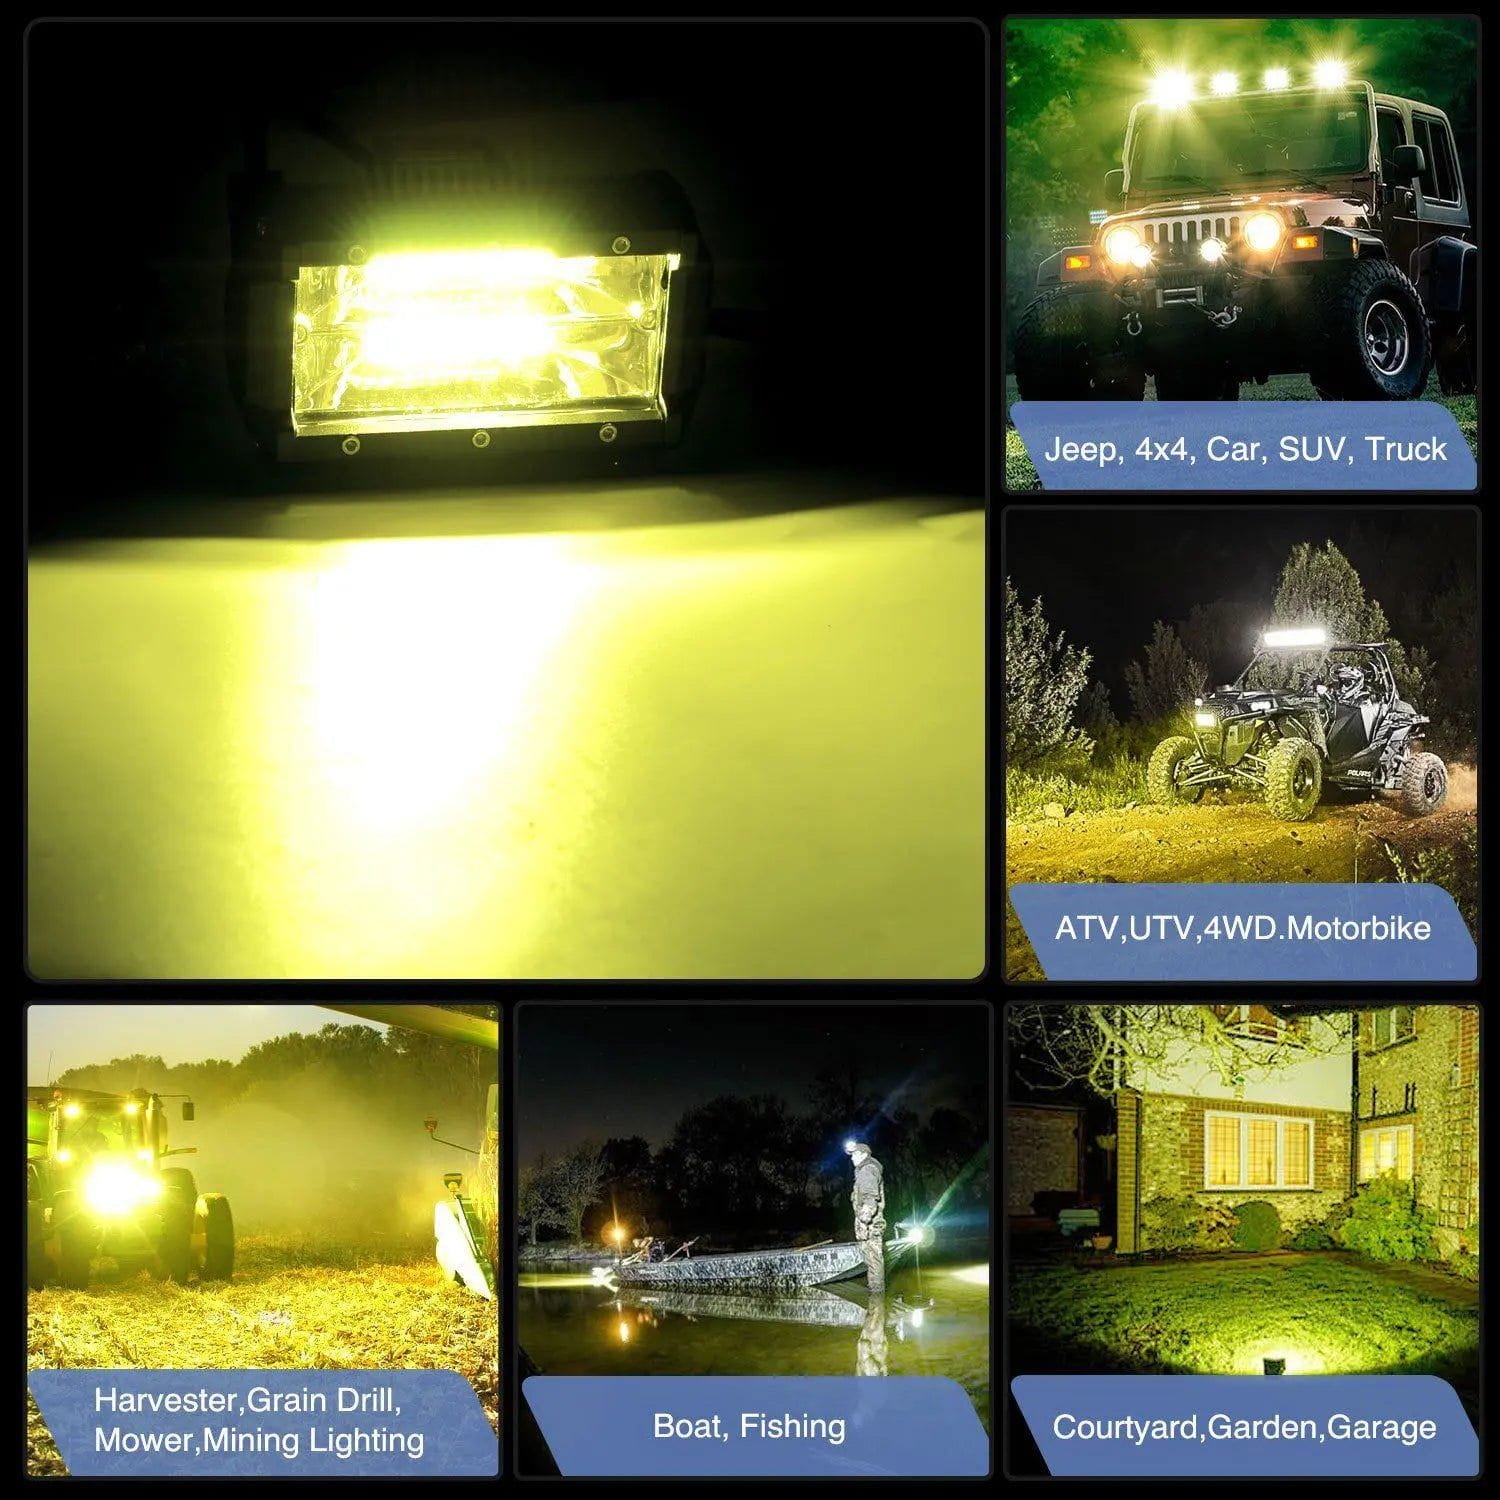 LED Light Bar 5.2" 72W 10800LM Yellow Flood Led Light Bar Kit (Pair) | 16AWG Wire 3Pin Switch